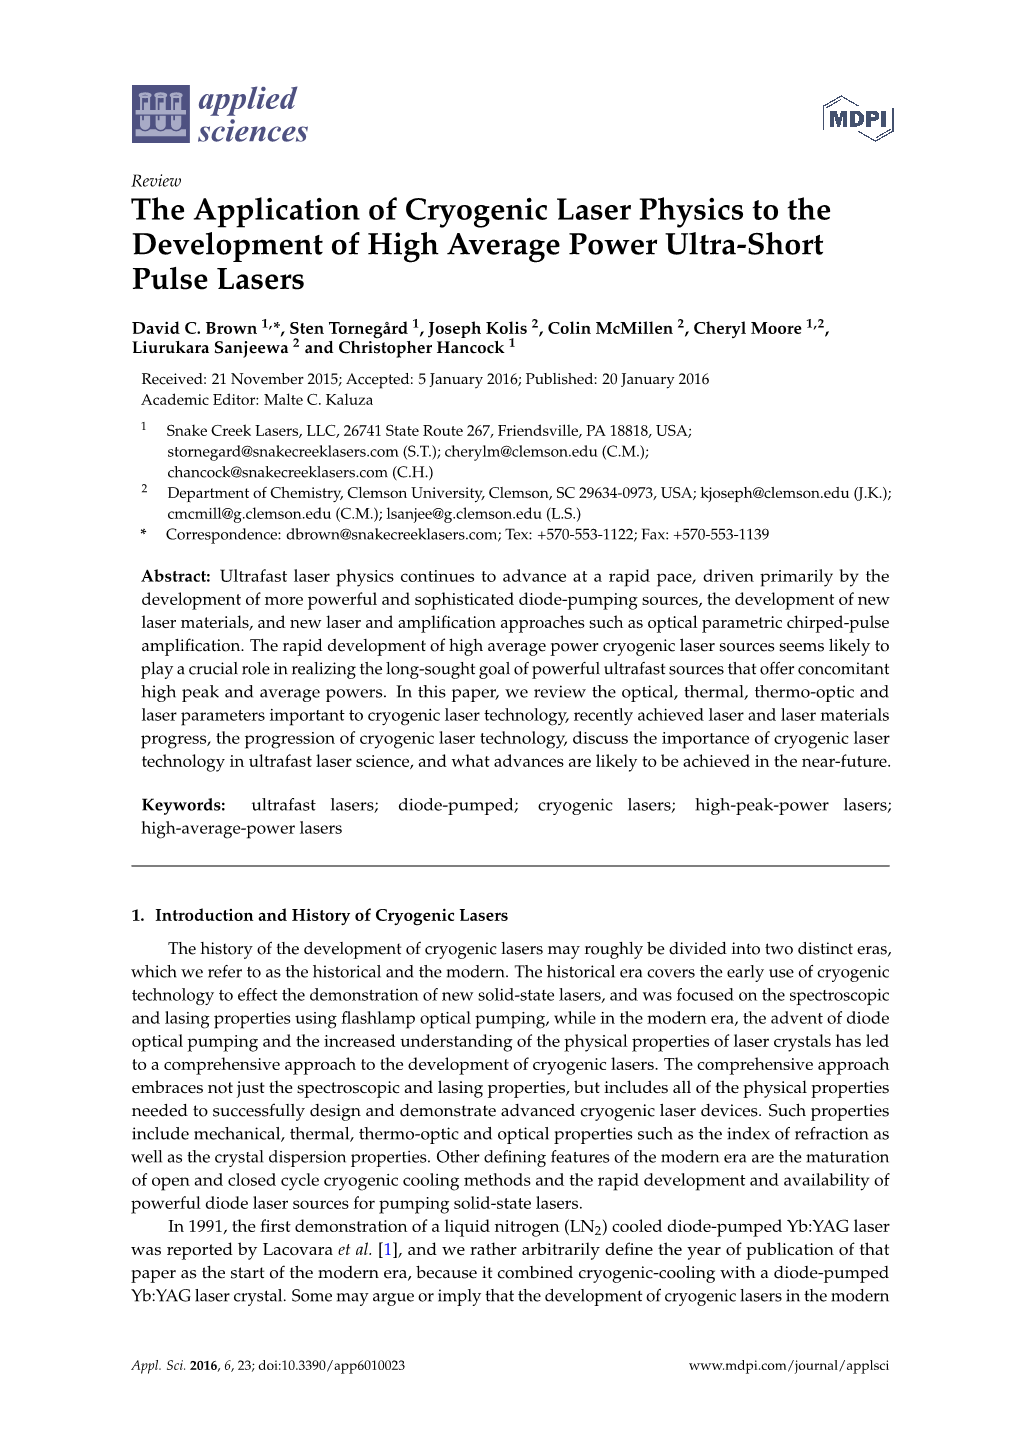 The Application of Cryogenic Laser Physics to the Development of High Average Power Ultra-Short Pulse Lasers